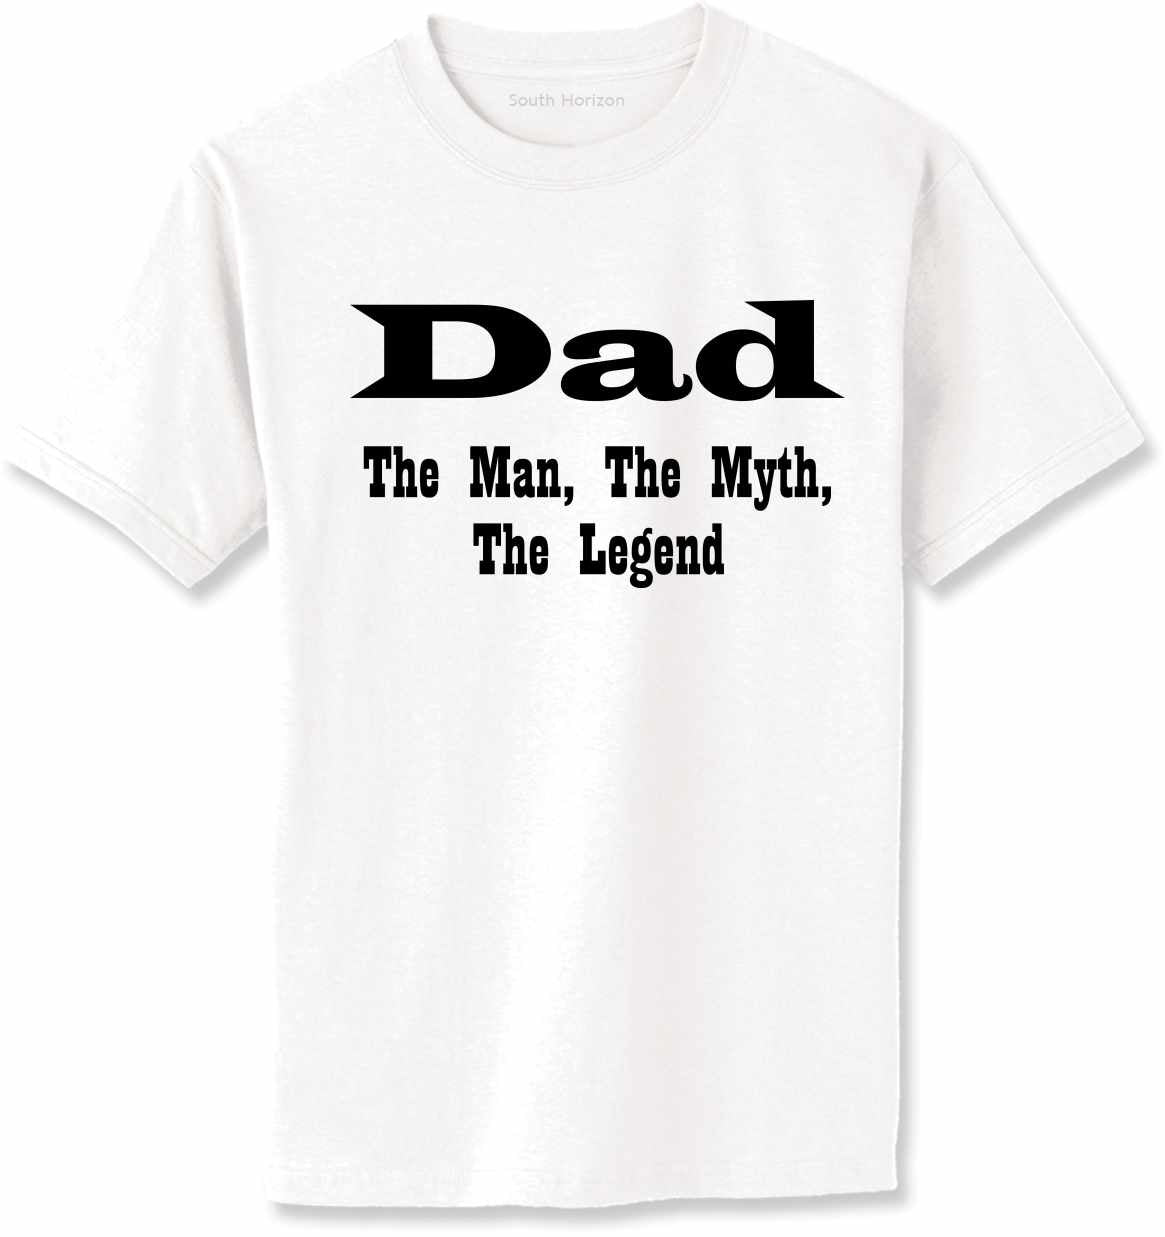 DAD, The Man, The Myth, The Legend Adult T-Shirt